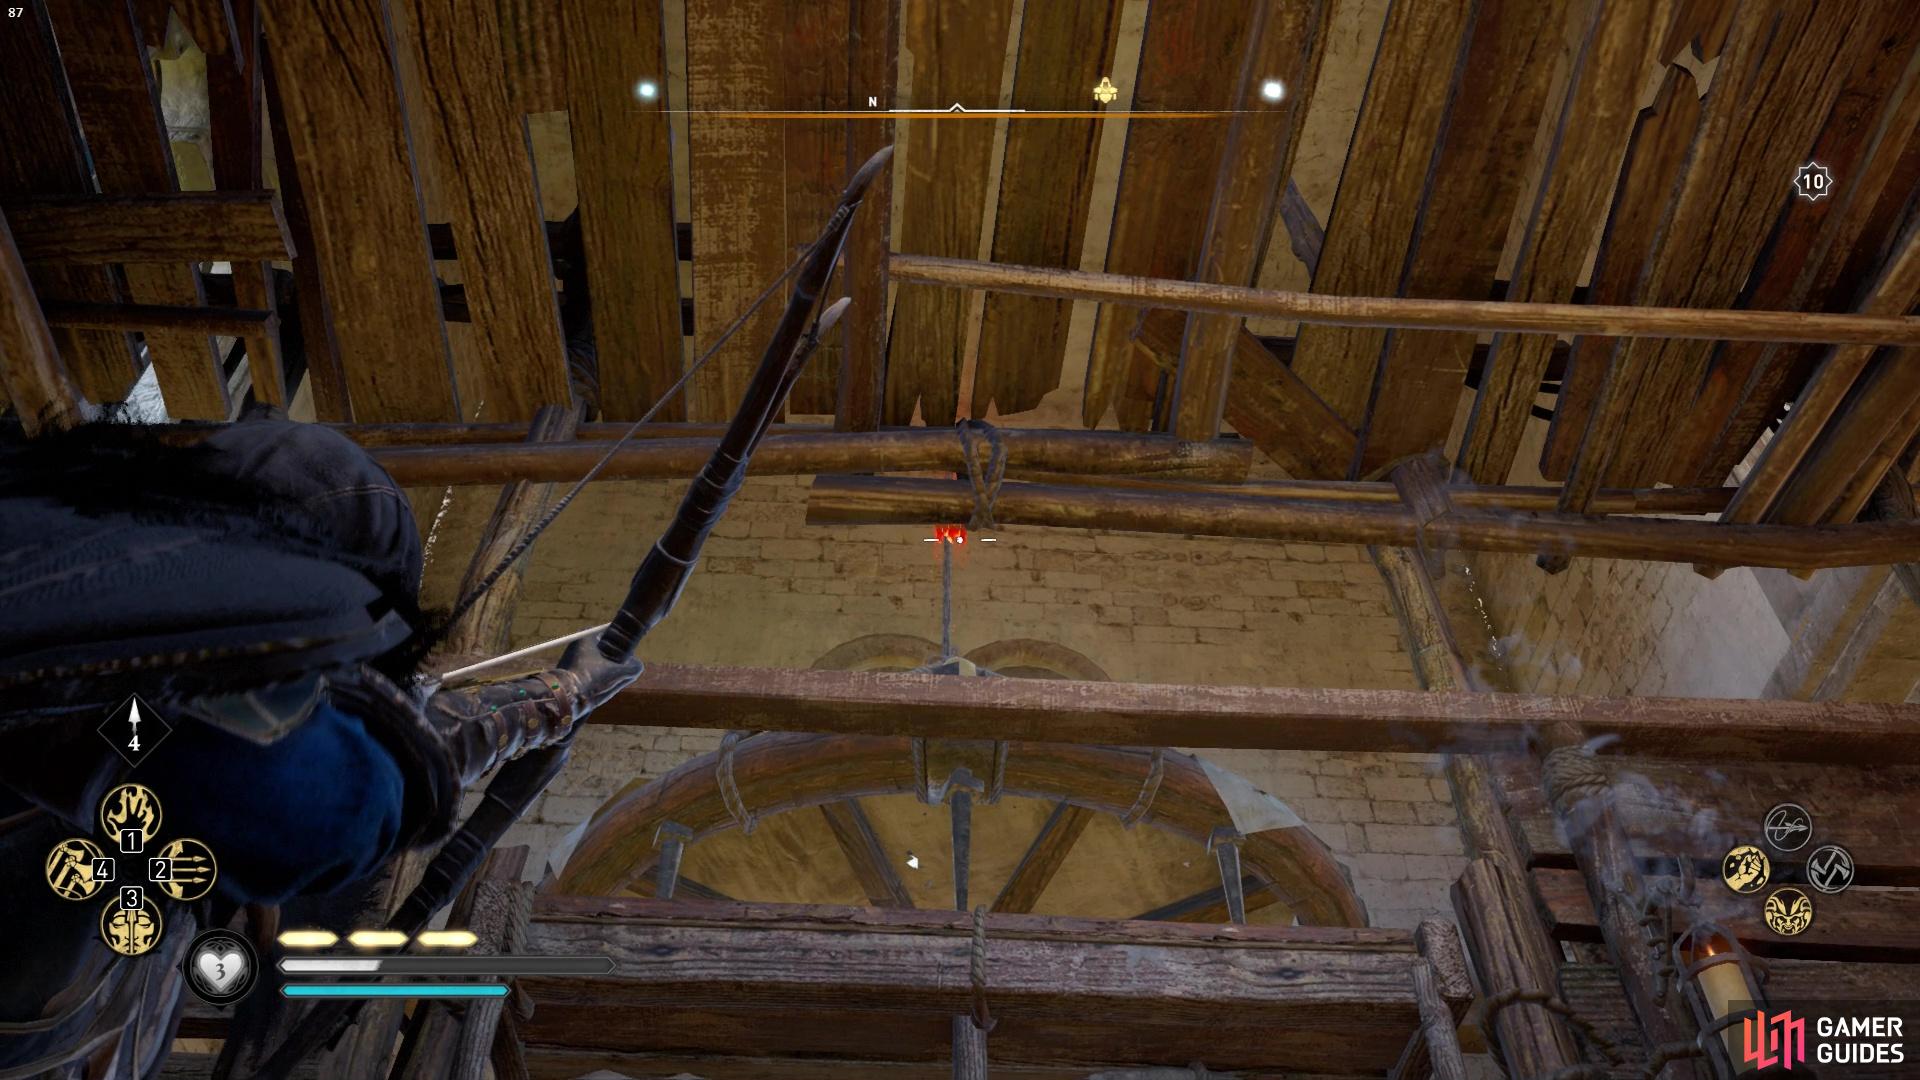 Then, shoot down the chandelier so you can move the barricade and reach the chest.